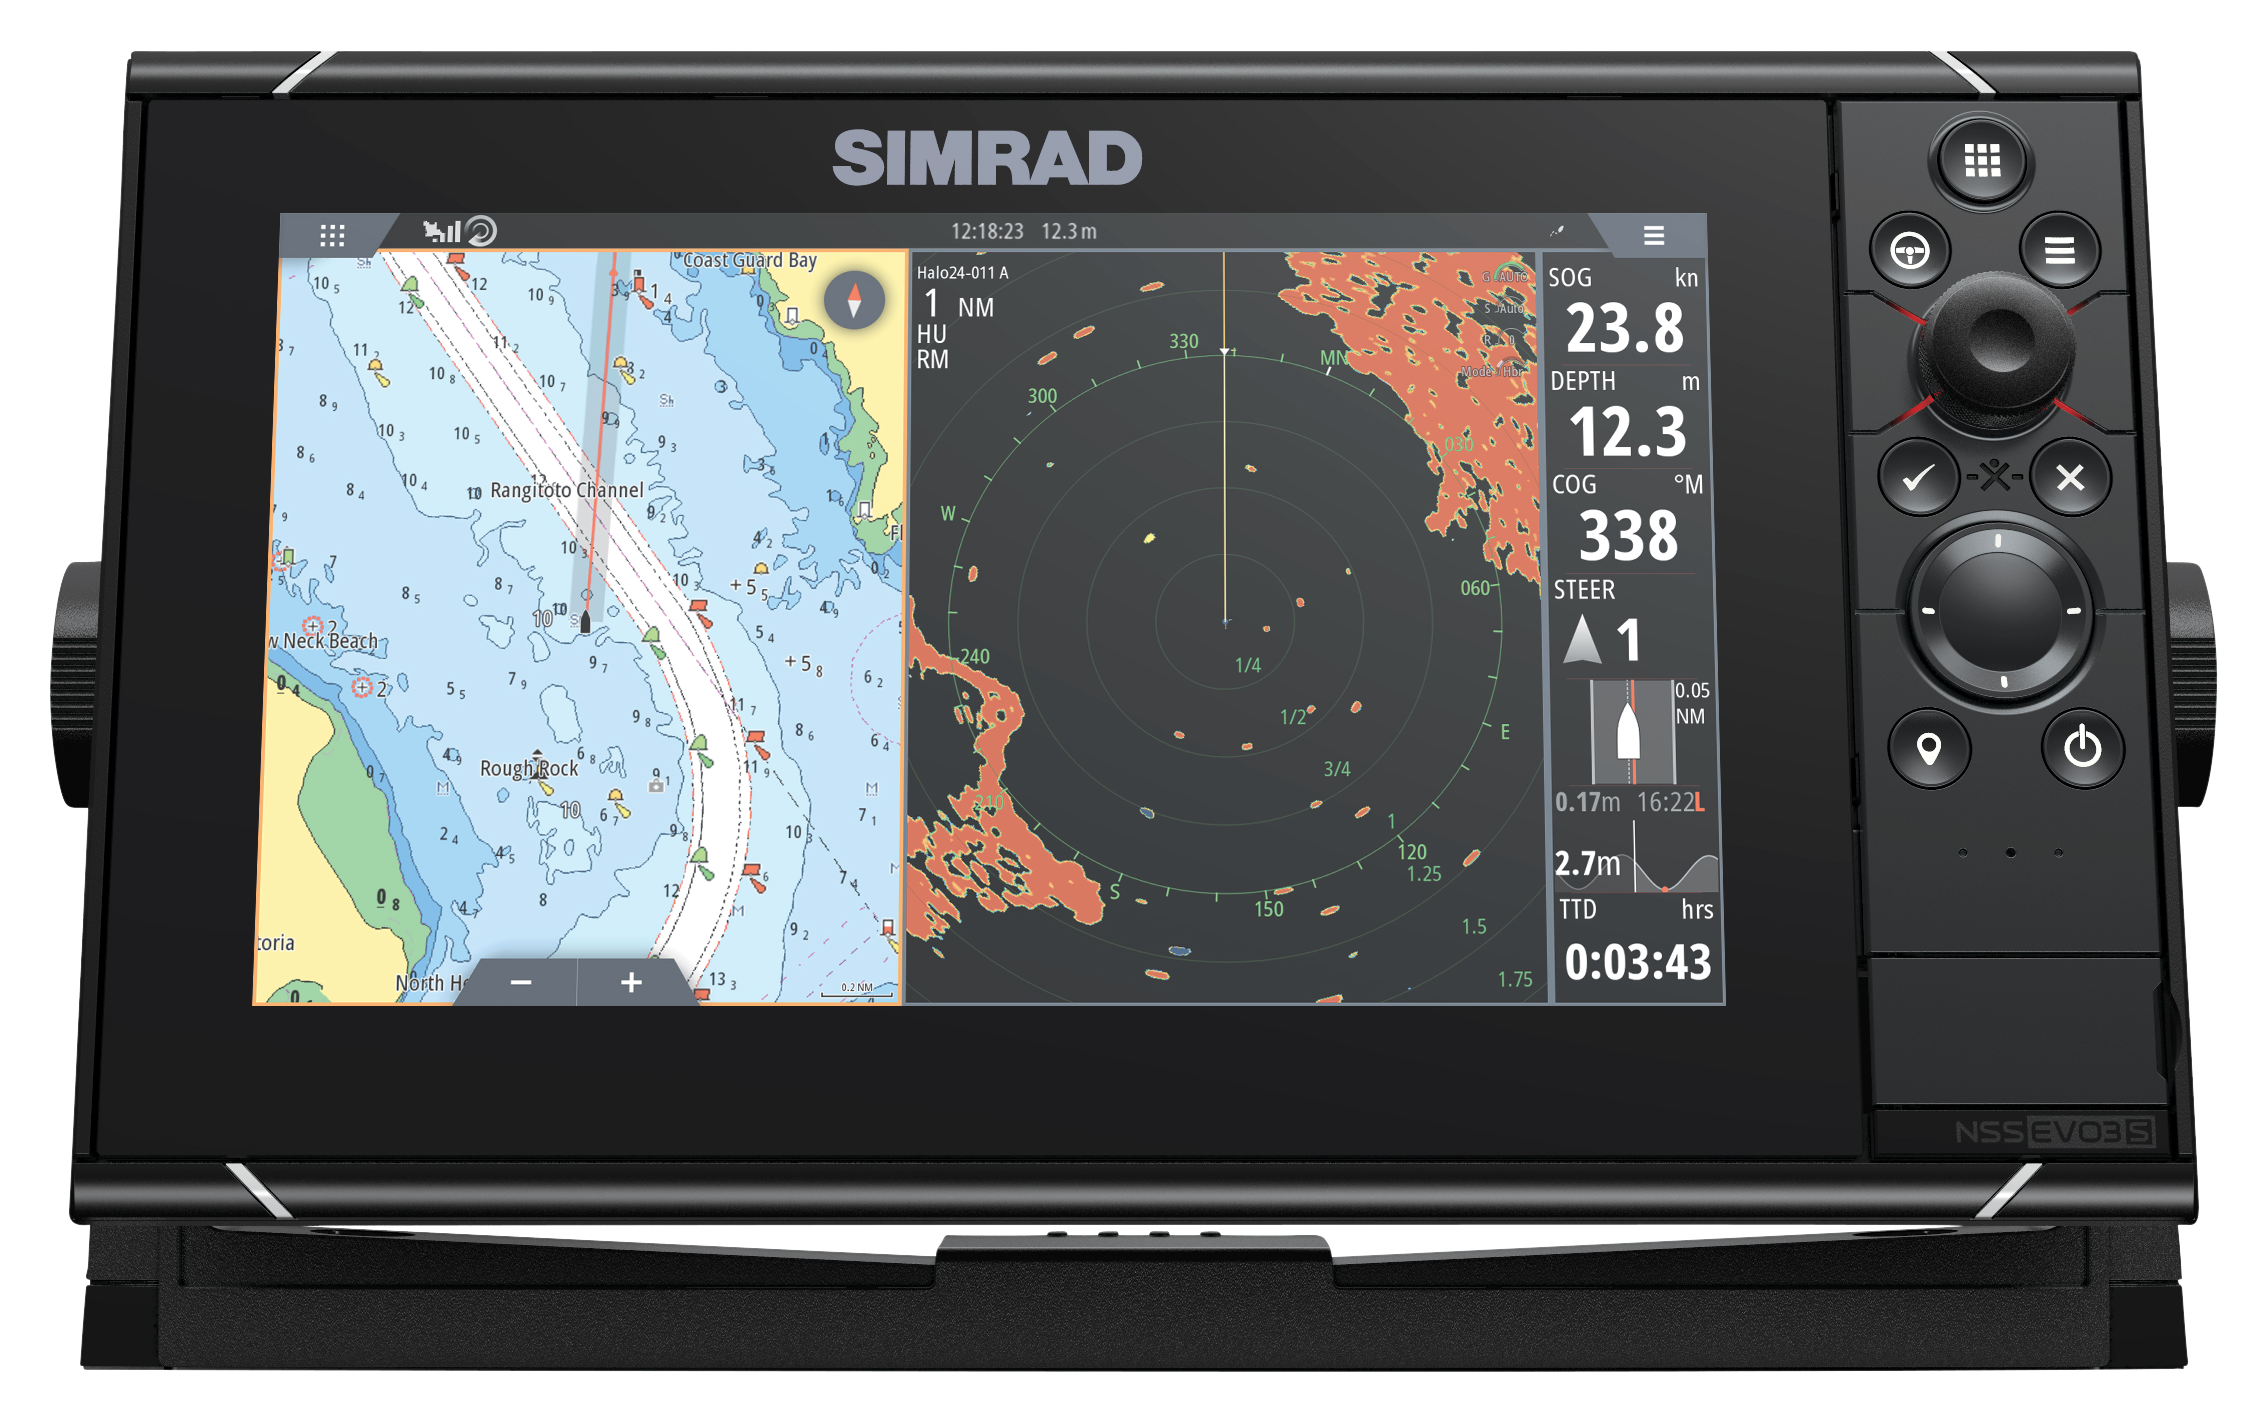 Simrad NSS evo3S Fish Finder/Chartplotter with C-MAP US Enhanced Charts